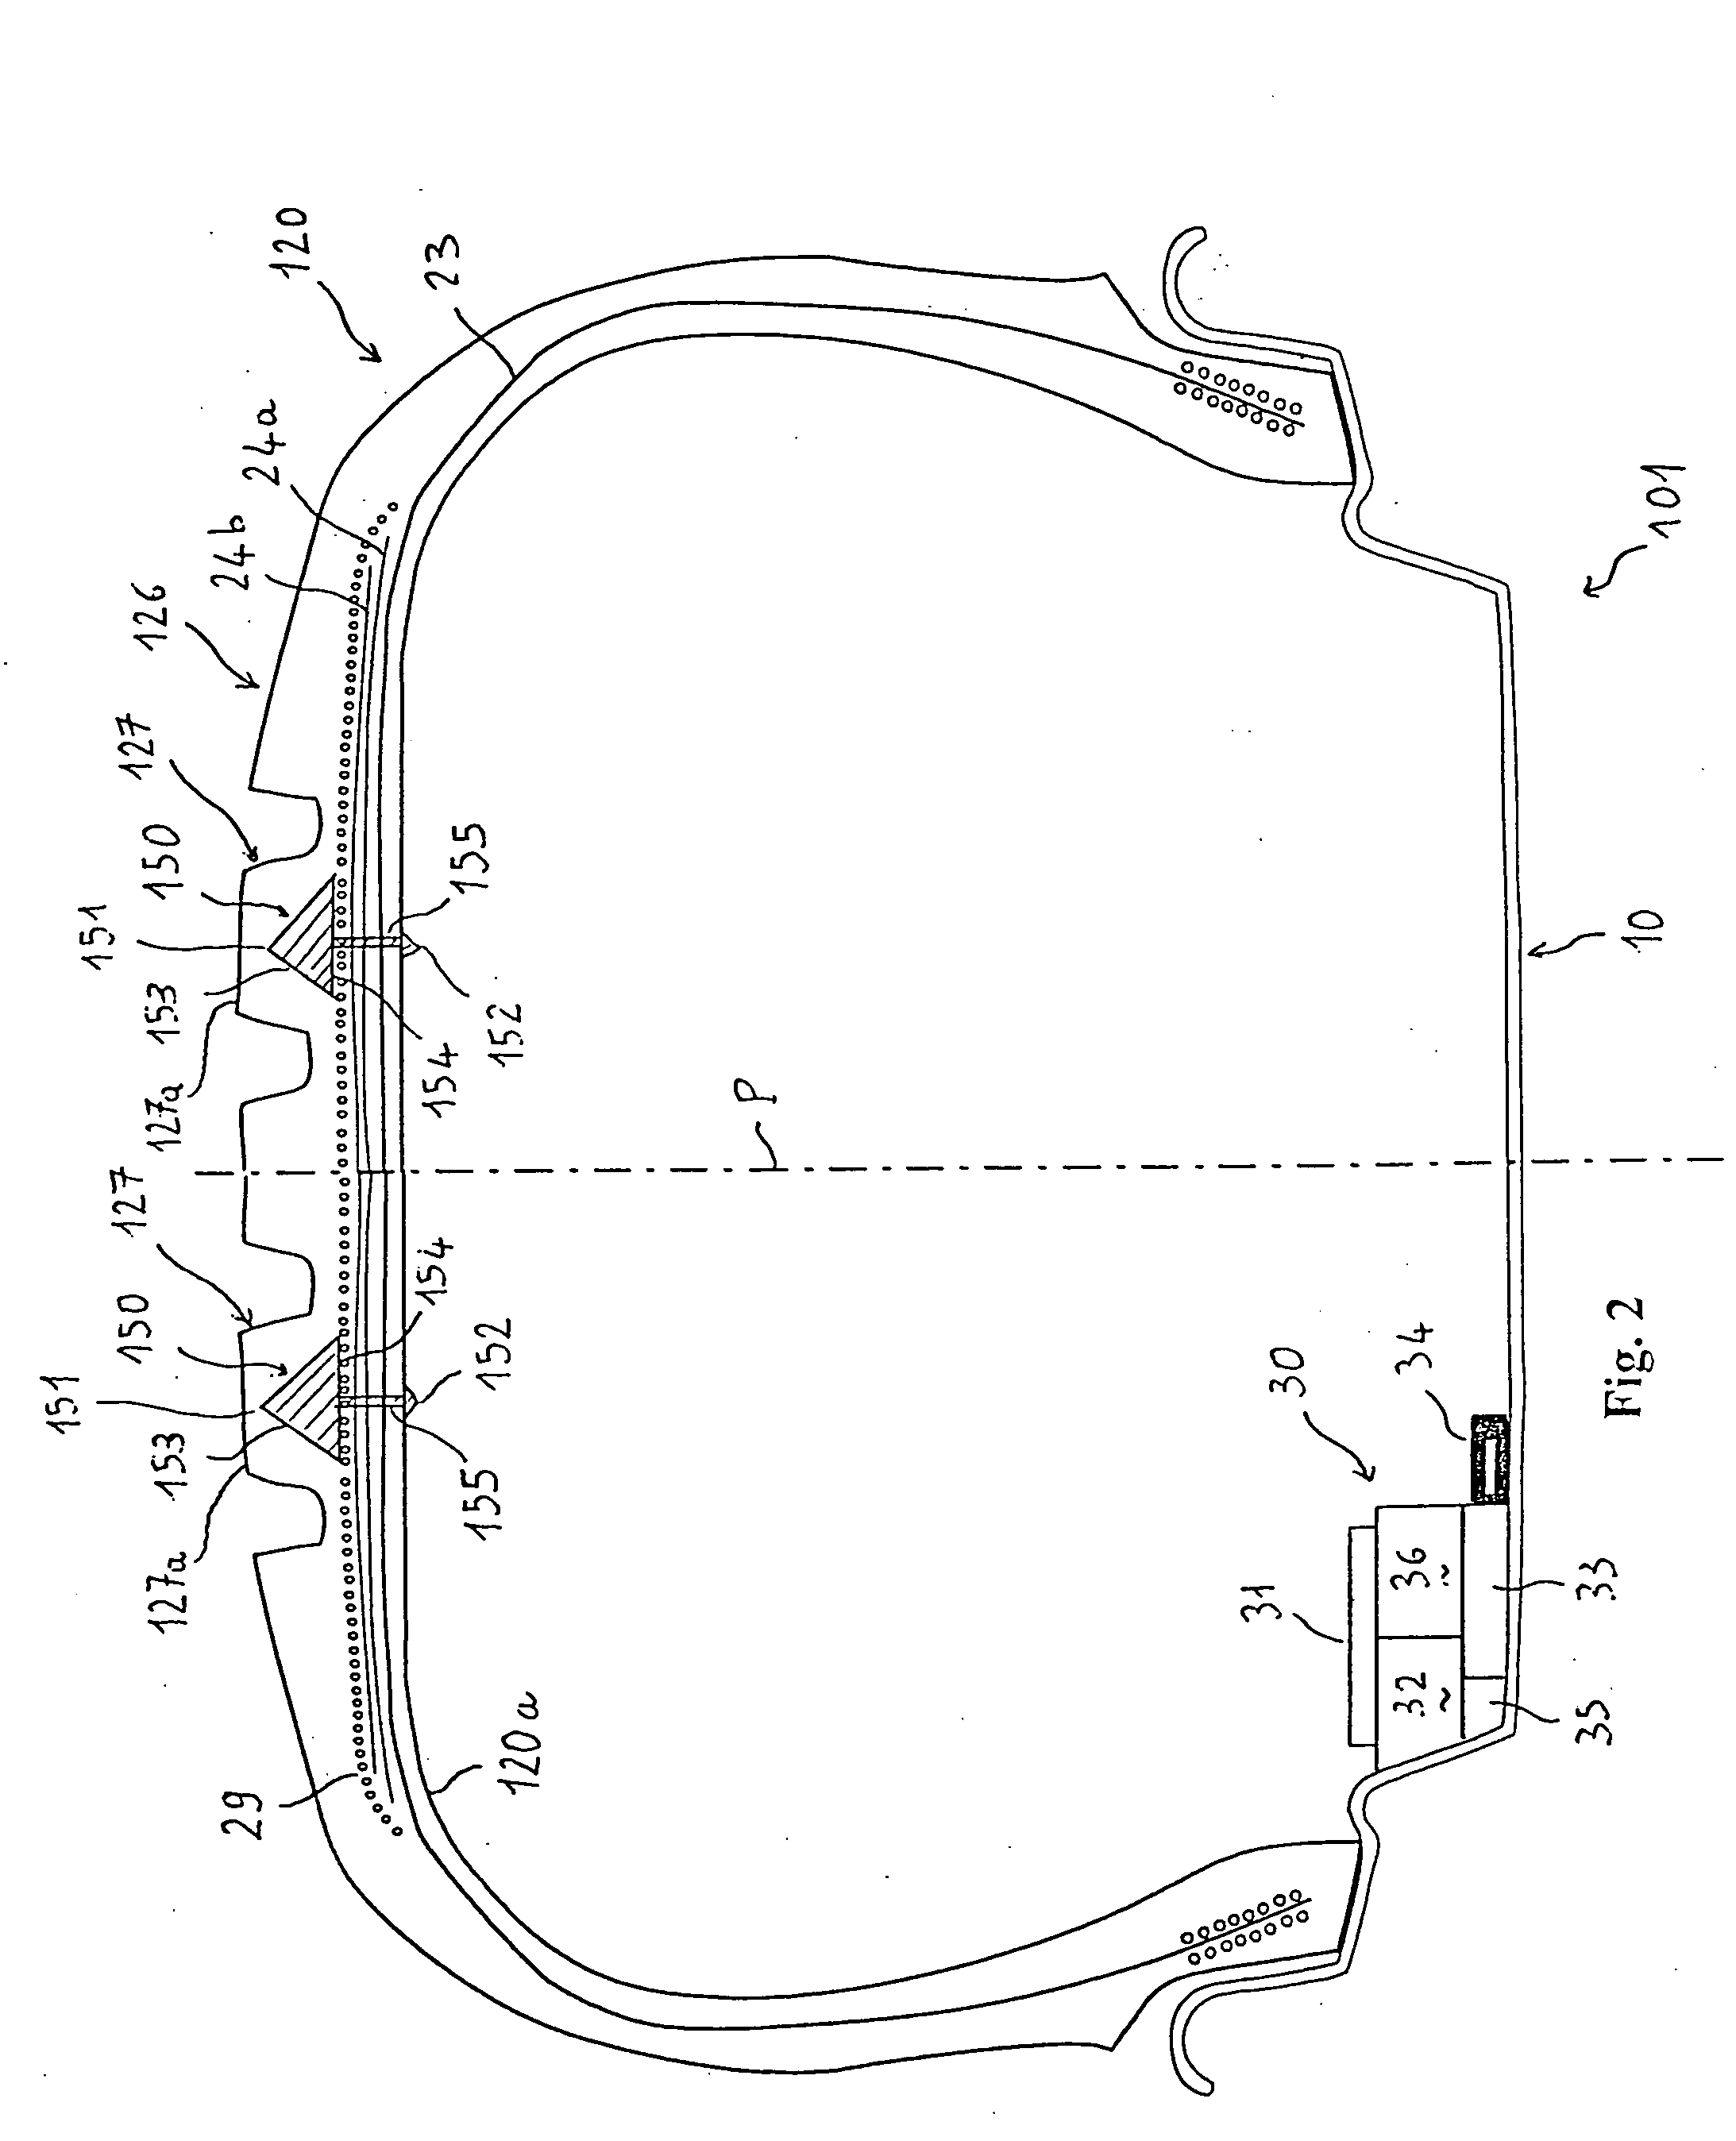 Method and systems for measuring wear on a tire